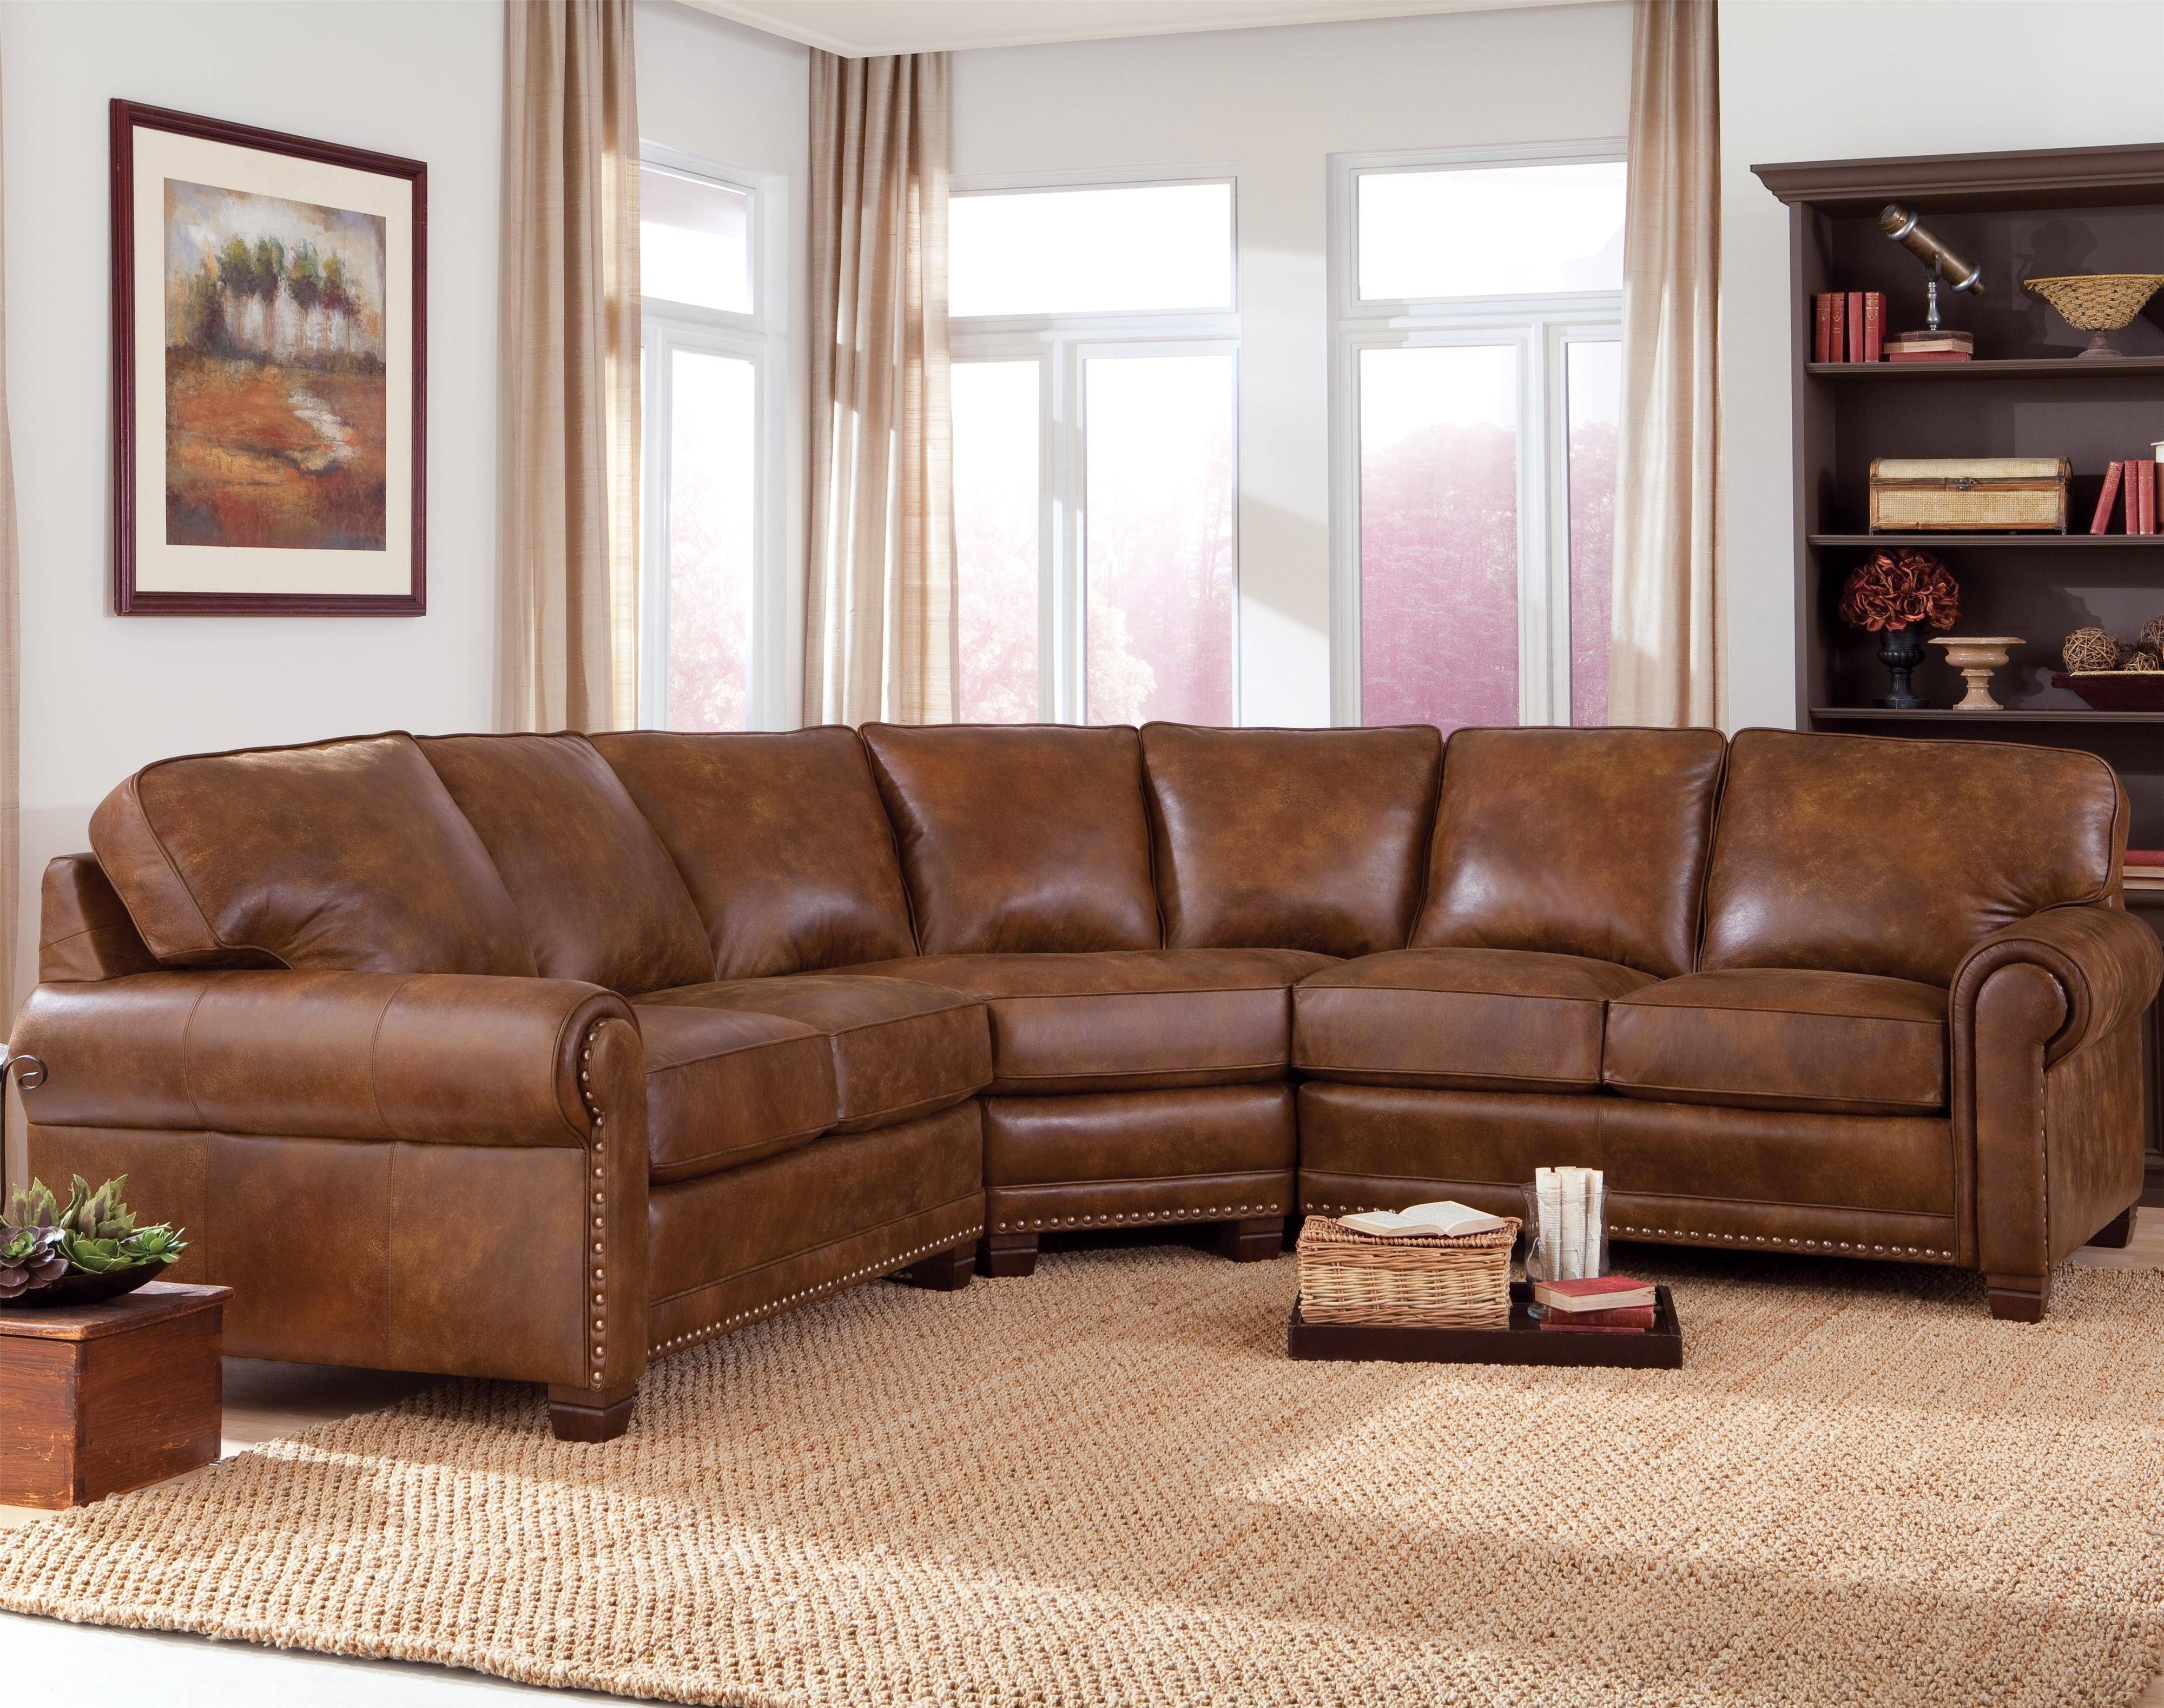 Round Sectional Sofa Microfiber | Tehranmix Decoration In Narrow Sectional Sofas (View 5 of 15)